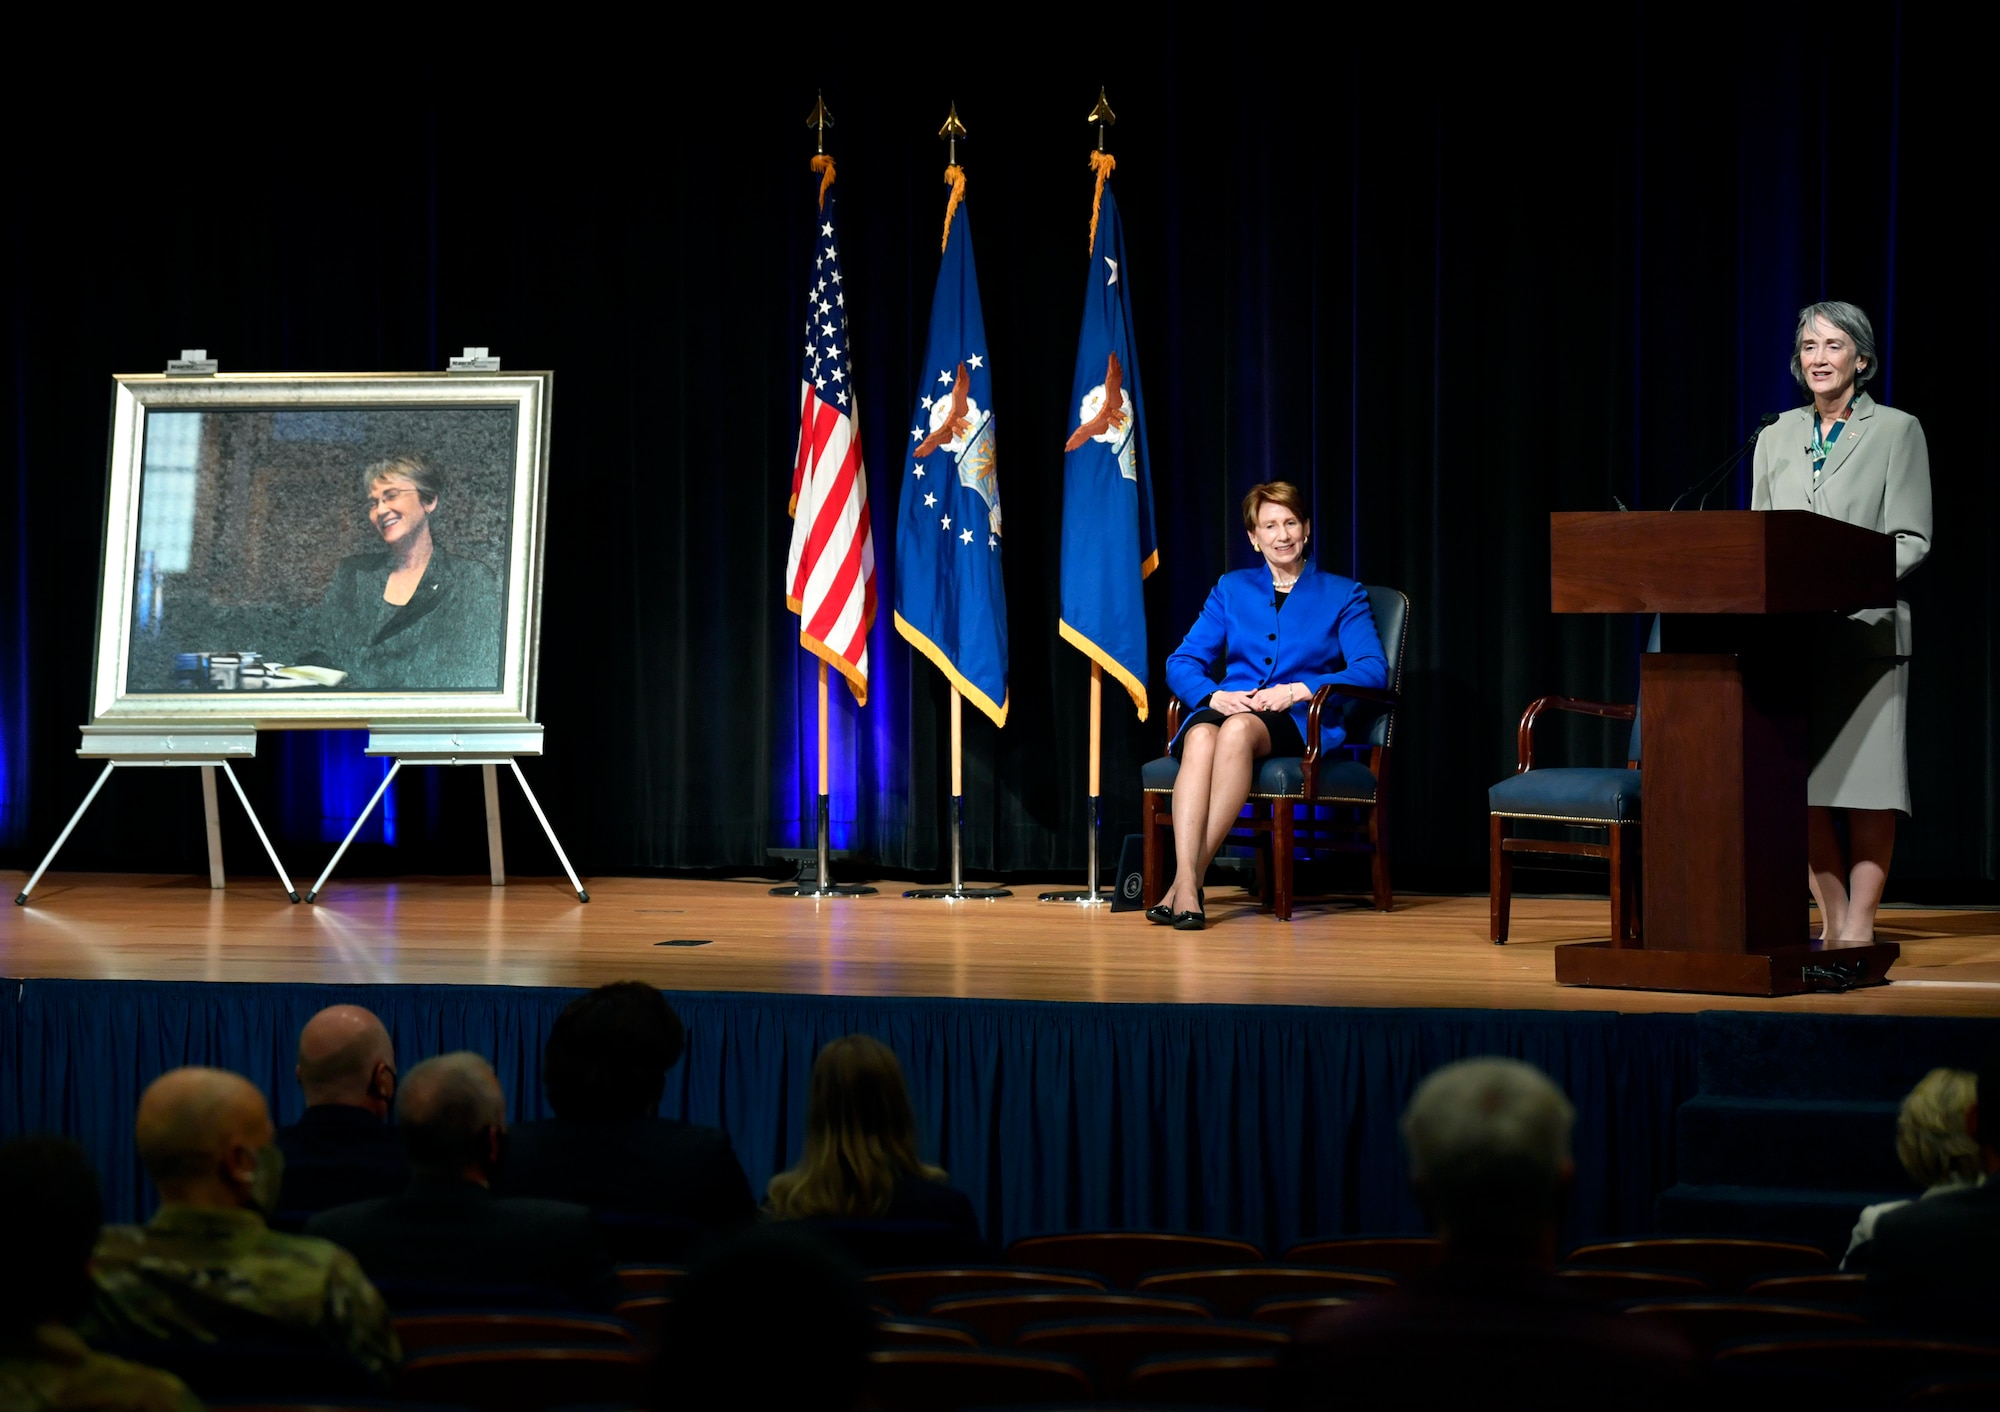 Former Secretary of the Air Force Dr. Heather Wilson speaks during the official portrait unveiling ceremony in the Pentagon, Arlington, Va., July 28, 2020. (U.S. Air Force photo by Wayne Clark)